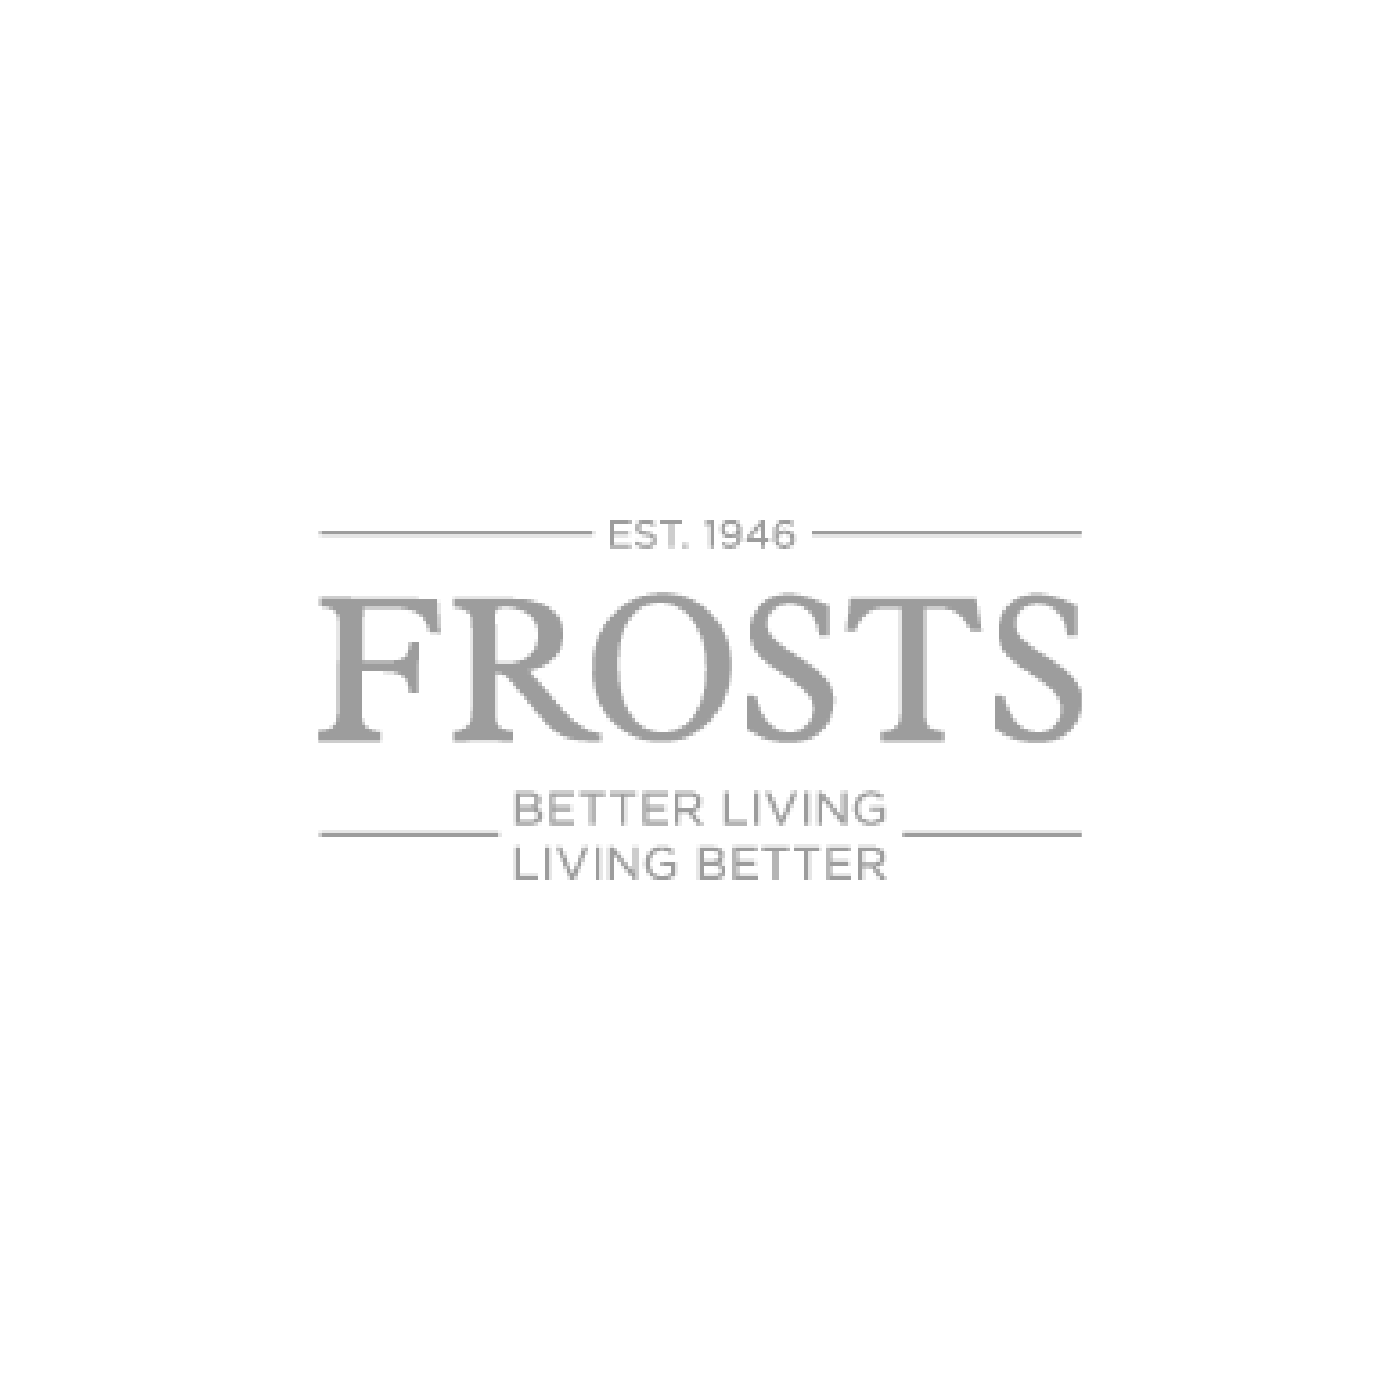 Frosts